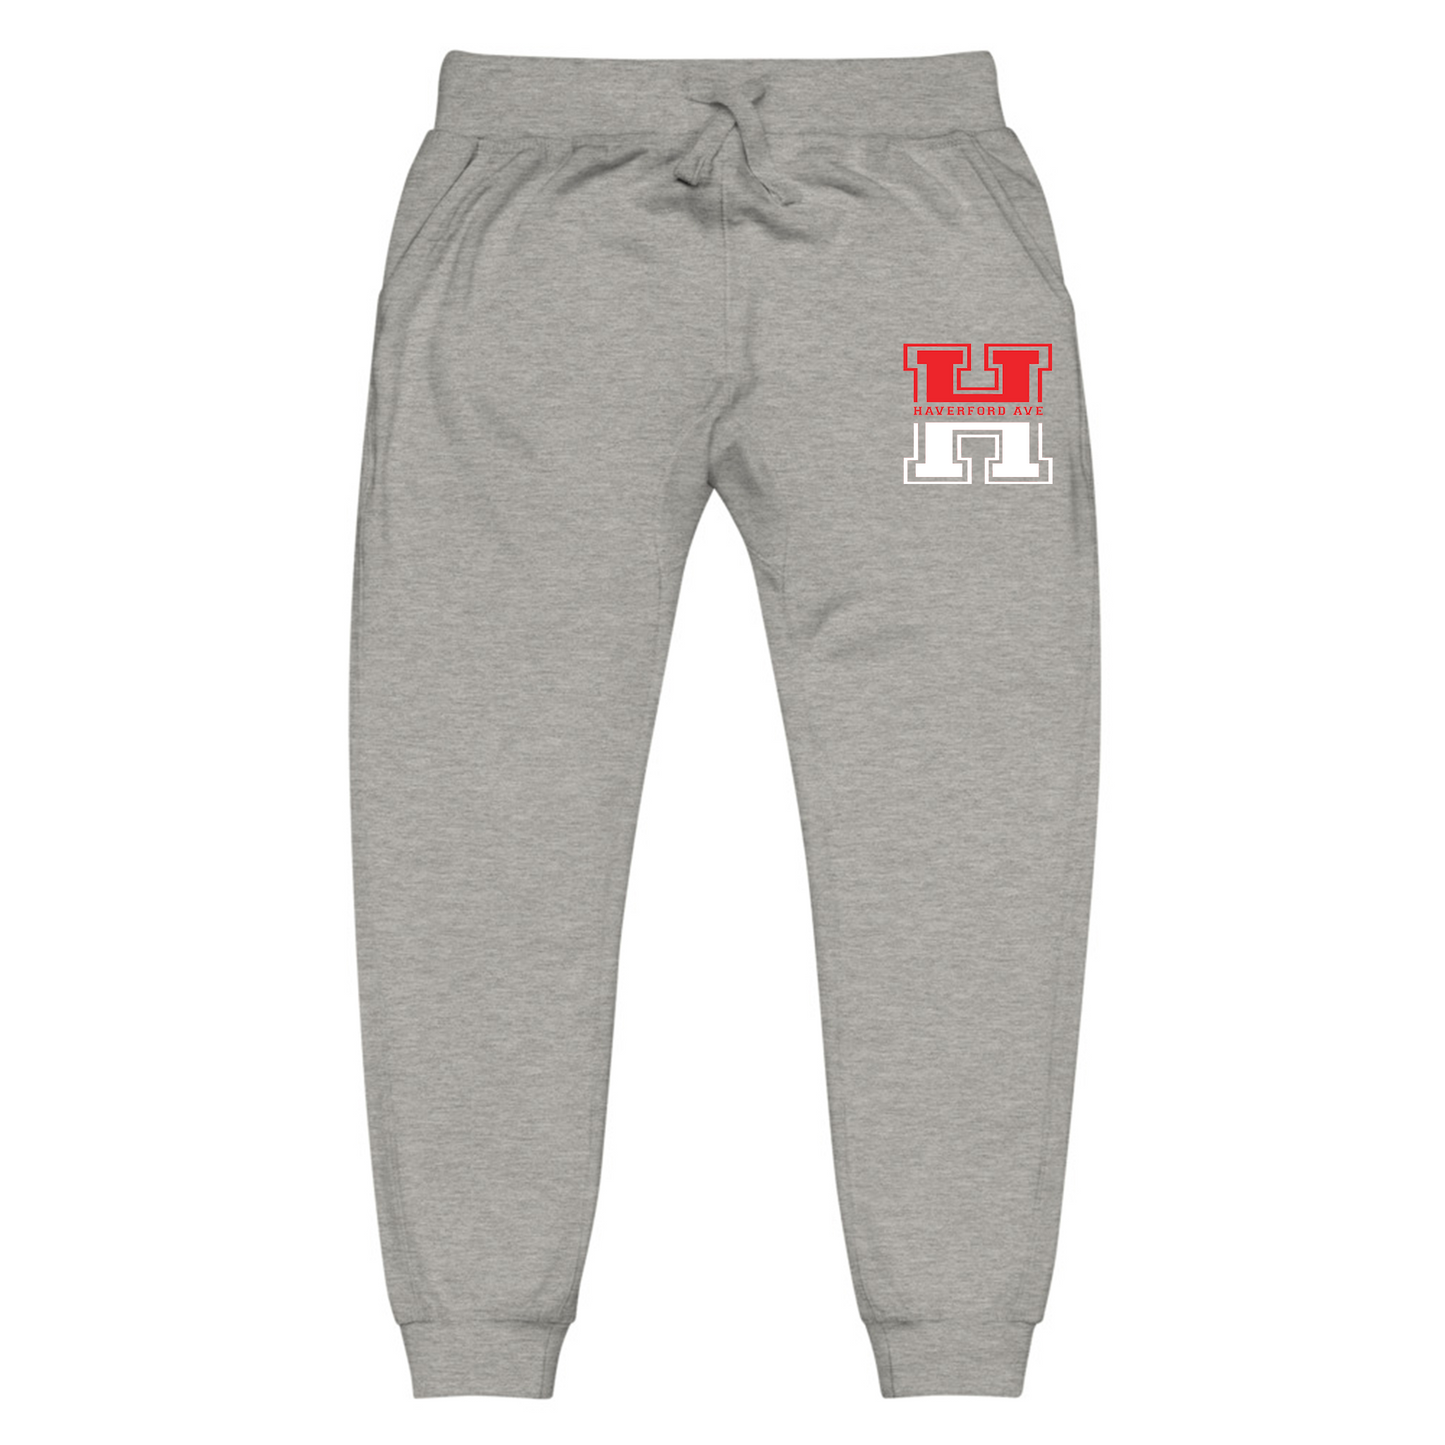 3835 Haverford Ave. Joggers/Sweatpants